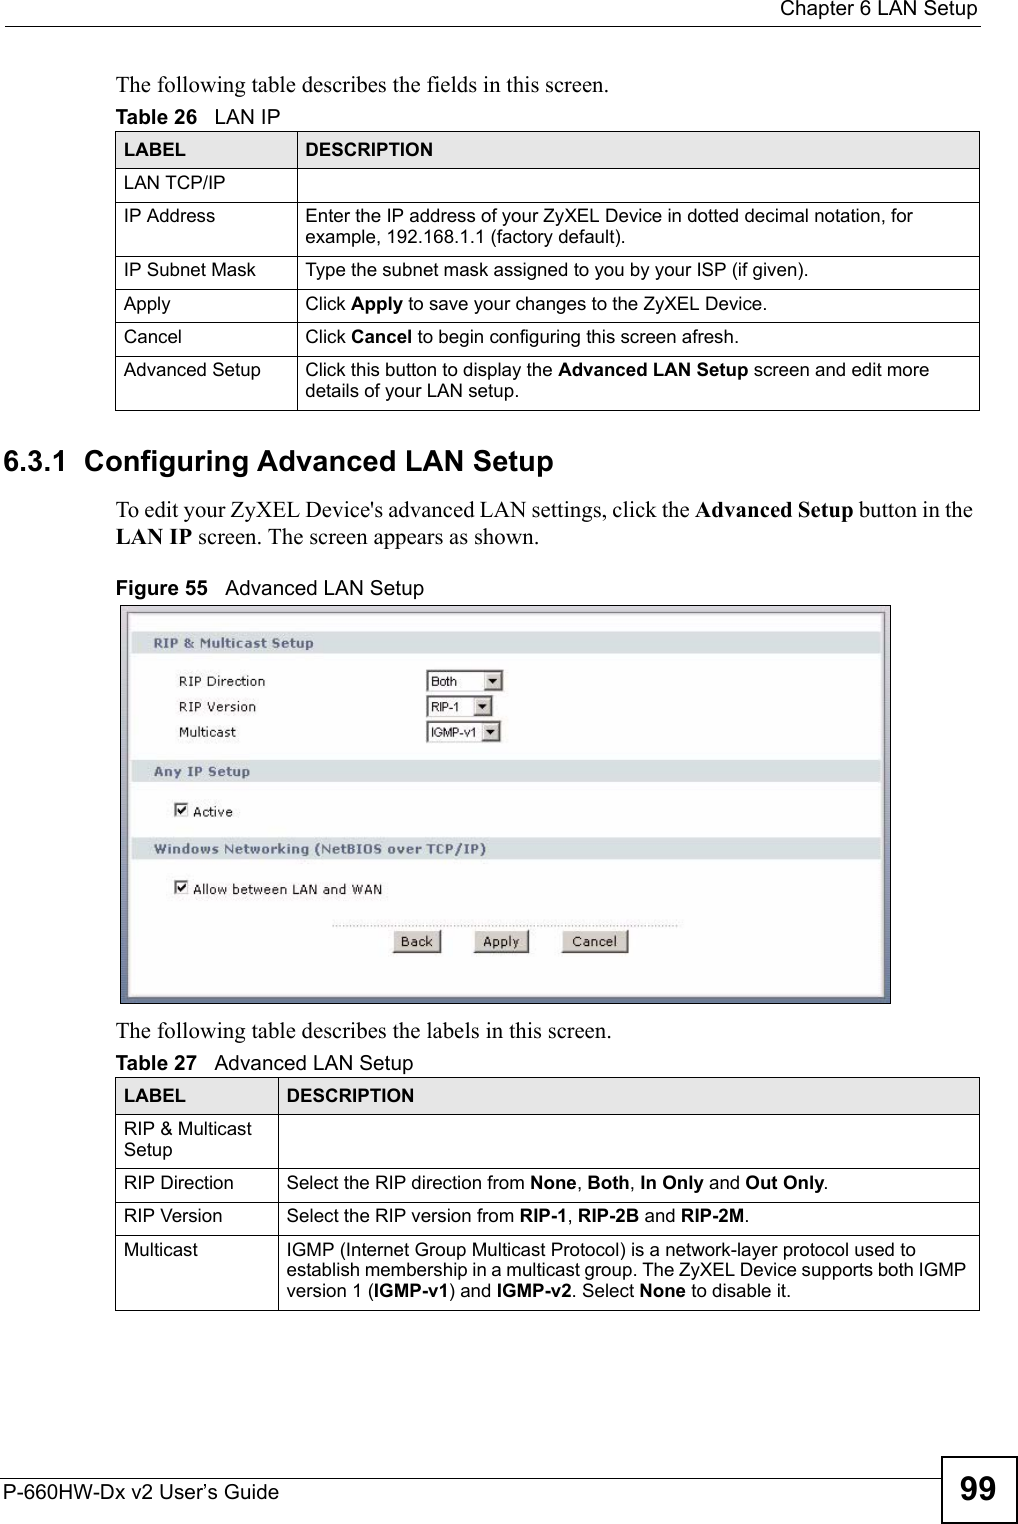  Chapter 6 LAN SetupP-660HW-Dx v2 User’s Guide 99The following table describes the fields in this screen.  6.3.1  Configuring Advanced LAN Setup To edit your ZyXEL Device&apos;s advanced LAN settings, click the Advanced Setup button in the LAN IP screen. The screen appears as shown.Figure 55   Advanced LAN SetupThe following table describes the labels in this screen.  Table 26   LAN IPLABEL DESCRIPTIONLAN TCP/IPIP Address Enter the IP address of your ZyXEL Device in dotted decimal notation, for example, 192.168.1.1 (factory default). IP Subnet Mask  Type the subnet mask assigned to you by your ISP (if given).Apply Click Apply to save your changes to the ZyXEL Device.Cancel Click Cancel to begin configuring this screen afresh.Advanced Setup Click this button to display the Advanced LAN Setup screen and edit more details of your LAN setup.Table 27   Advanced LAN SetupLABEL DESCRIPTIONRIP &amp; Multicast SetupRIP Direction Select the RIP direction from None, Both, In Only and Out Only.RIP Version Select the RIP version from RIP-1, RIP-2B and RIP-2M.Multicast IGMP (Internet Group Multicast Protocol) is a network-layer protocol used to establish membership in a multicast group. The ZyXEL Device supports both IGMP version 1 (IGMP-v1) and IGMP-v2. Select None to disable it.